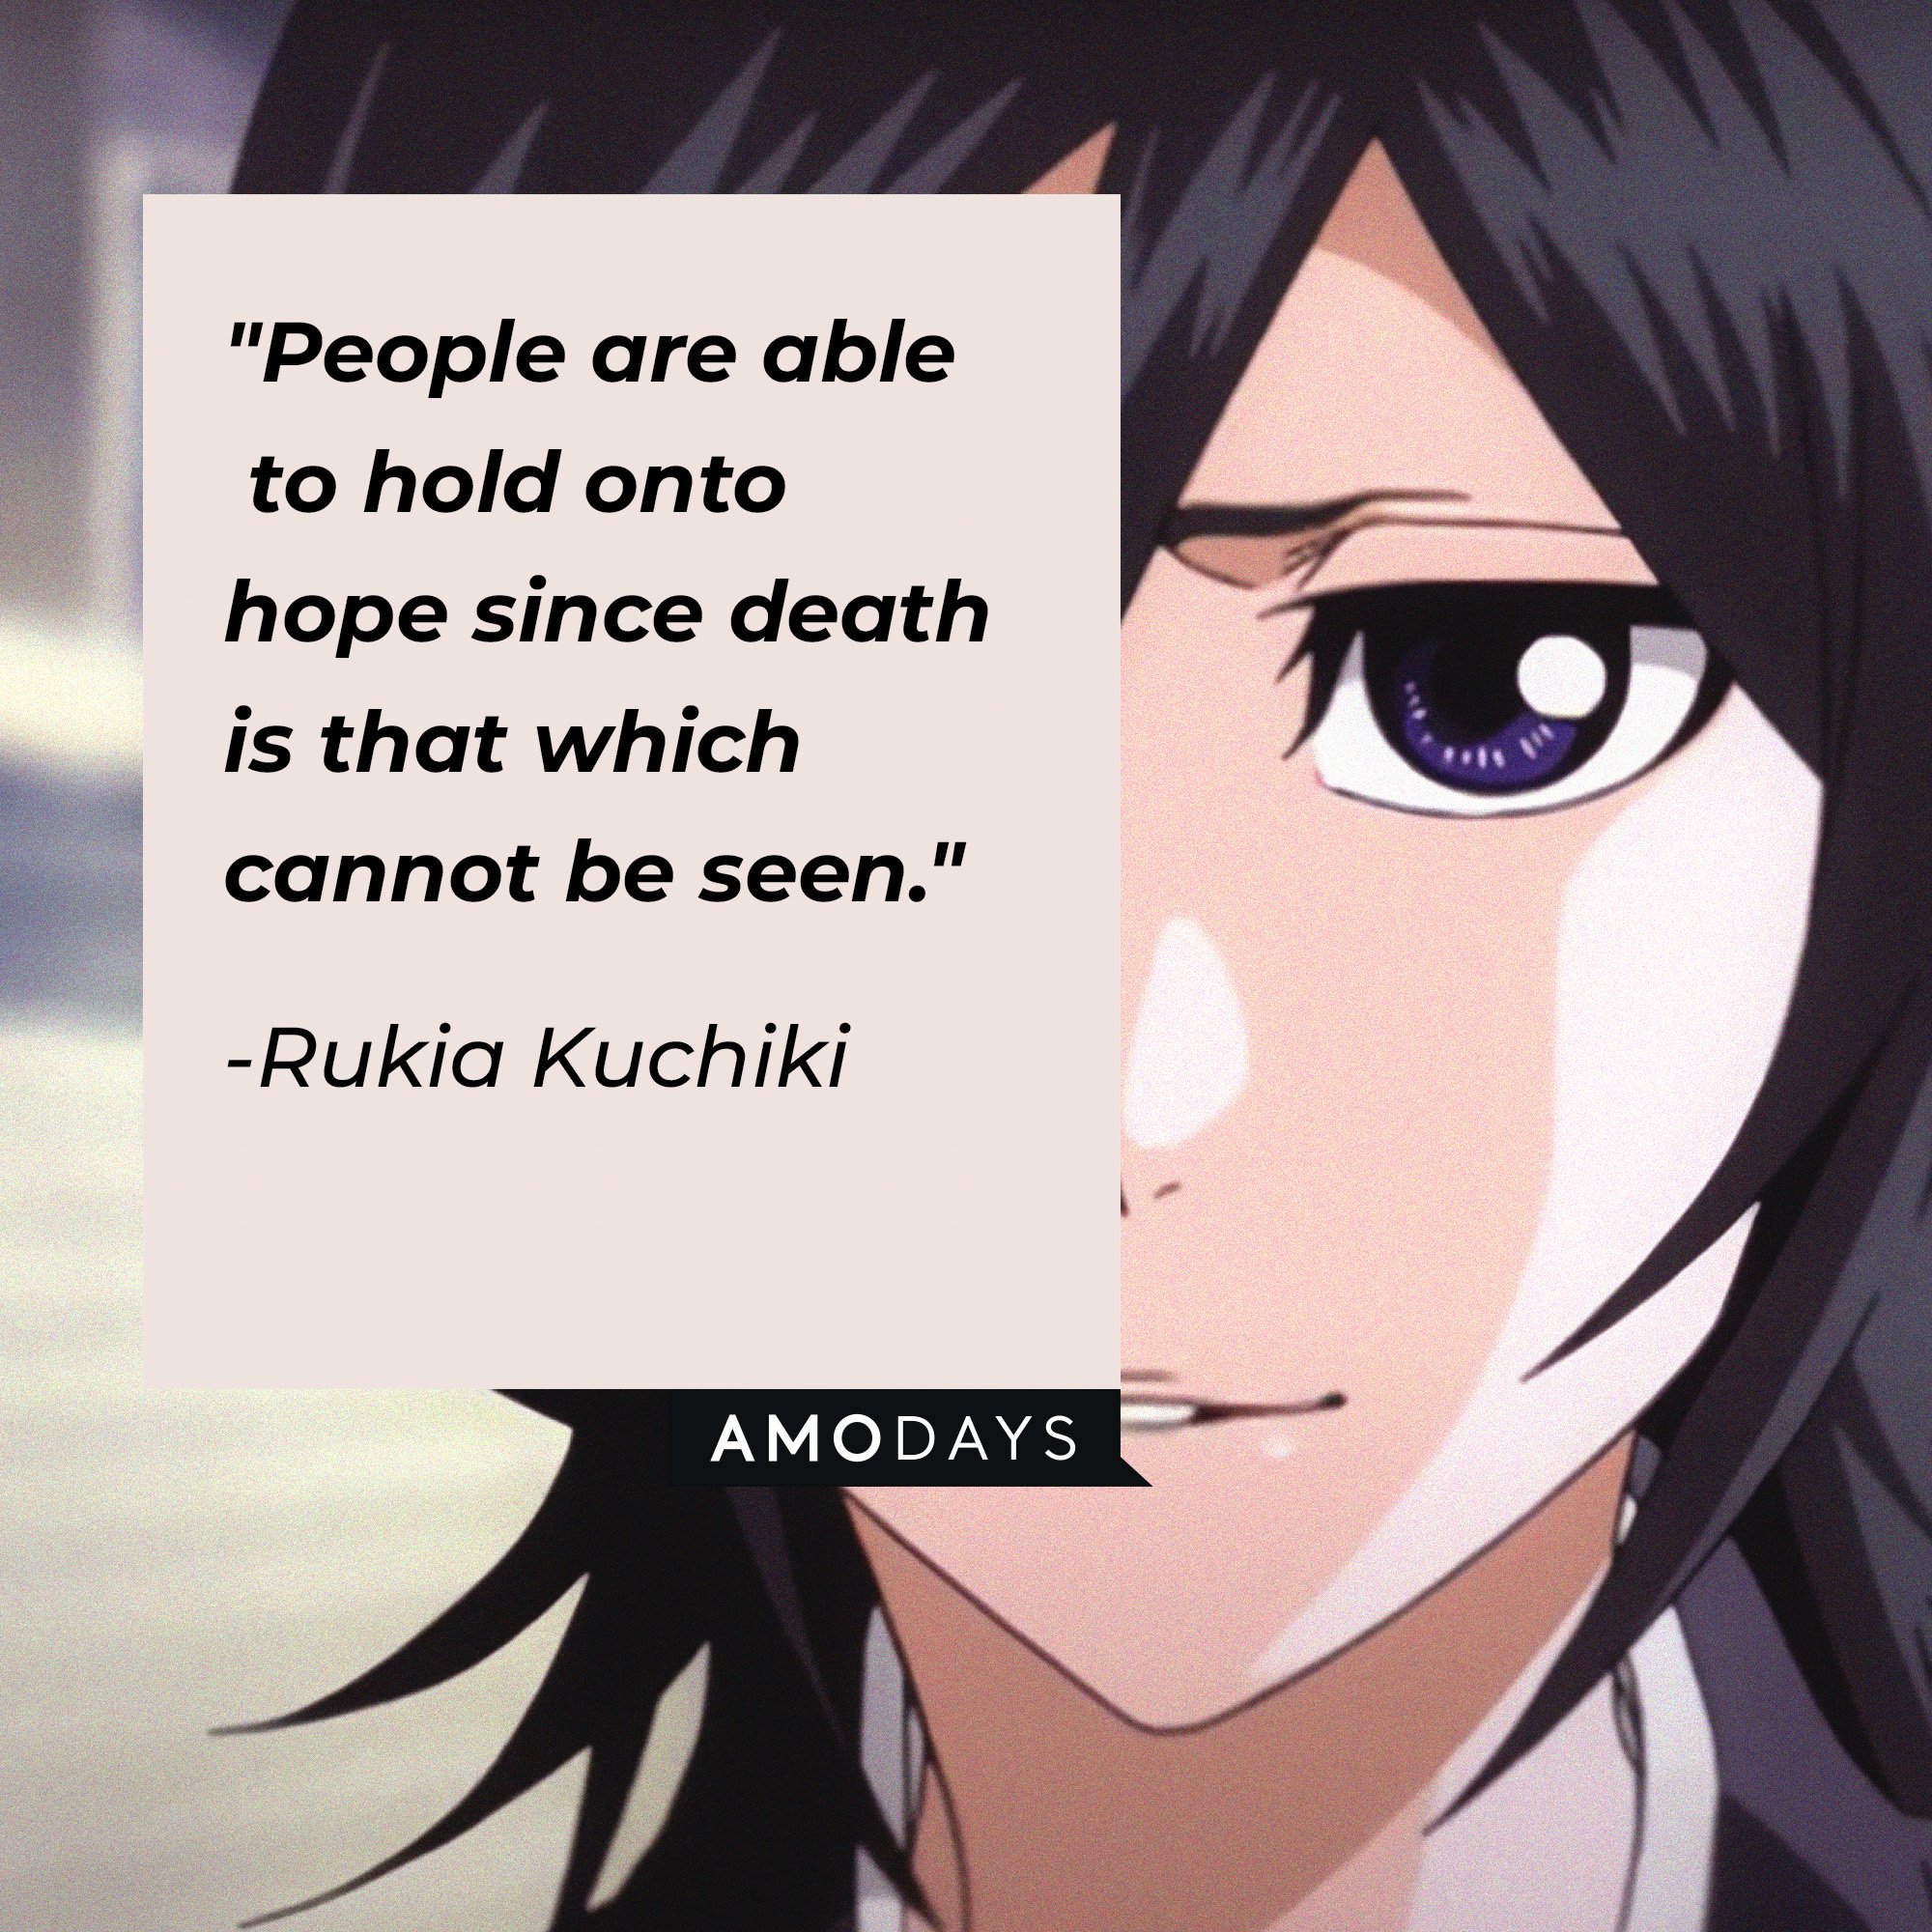 Rukia Kuchiki’s quote: "People are able to hold onto hope since death is that which cannot be seen." | Image: AmoDays